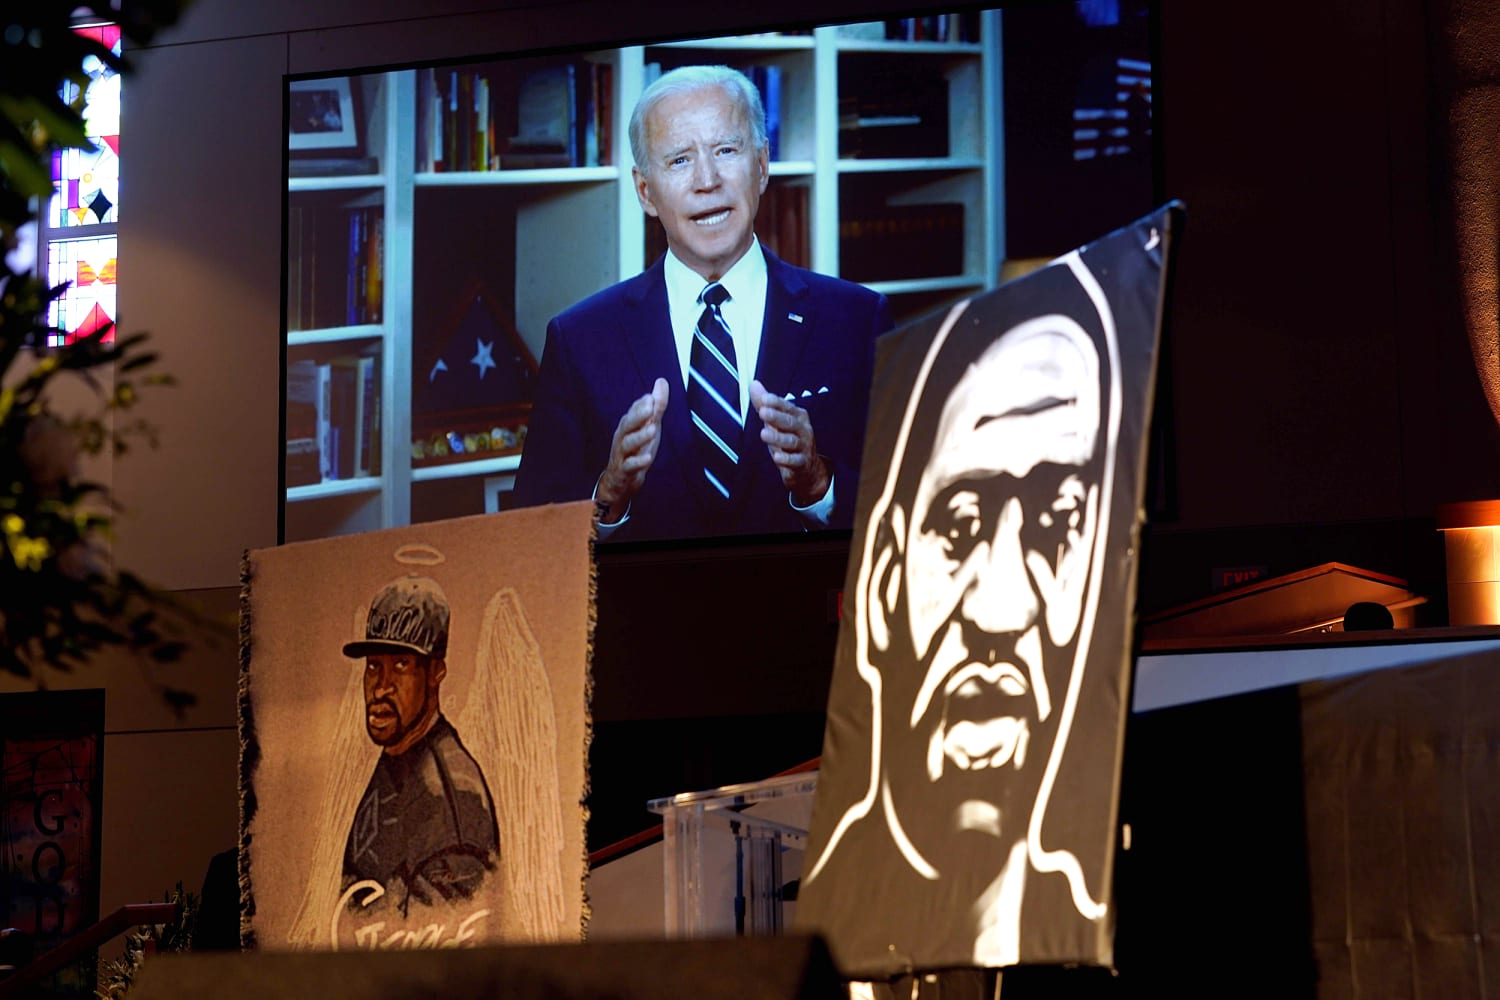 Biden calls for 'racial justice' during emotional George Floyd funeral speech